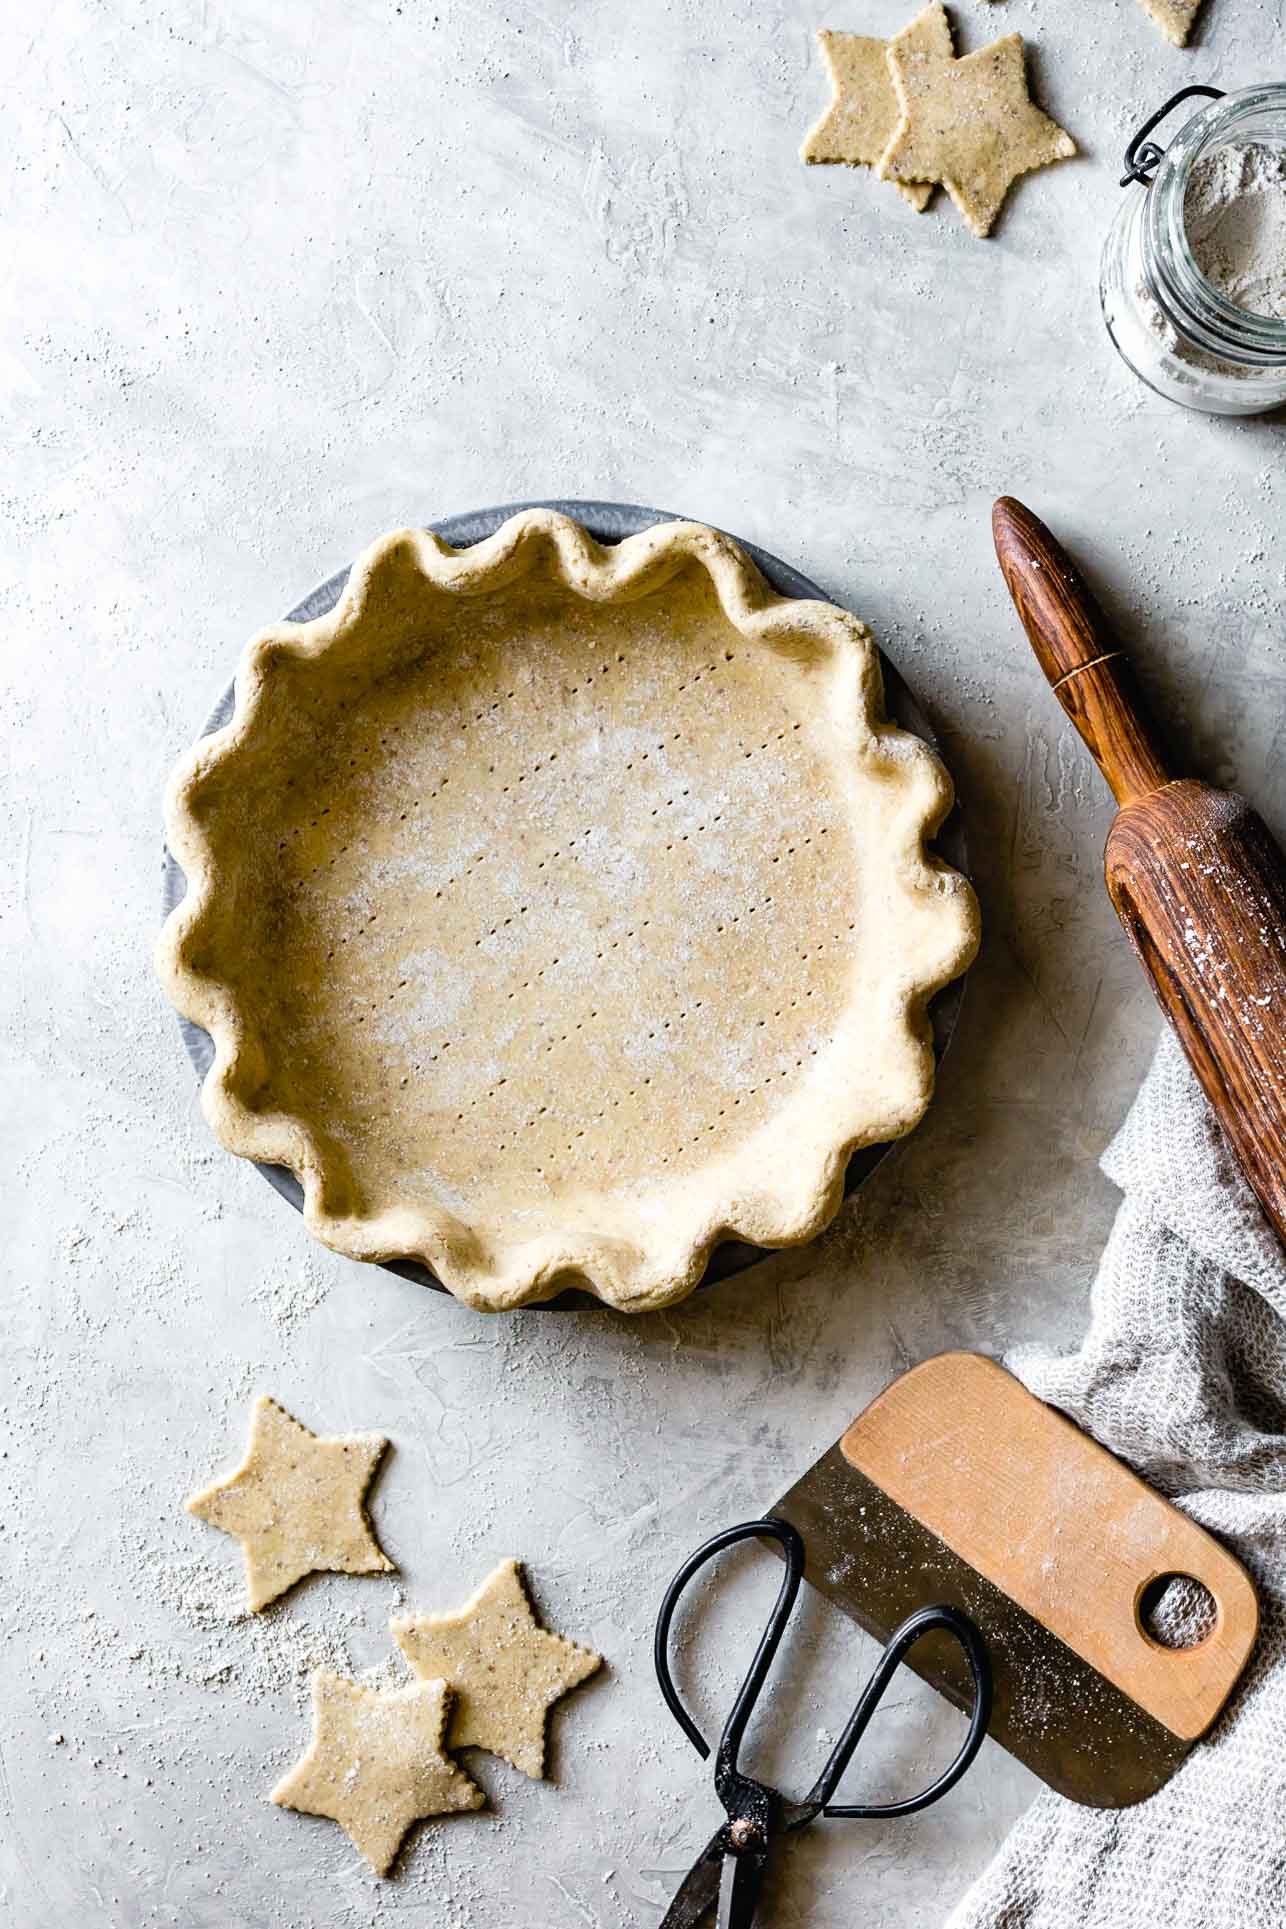 a gluten-free unbaked pie crust has been pricked with a fork